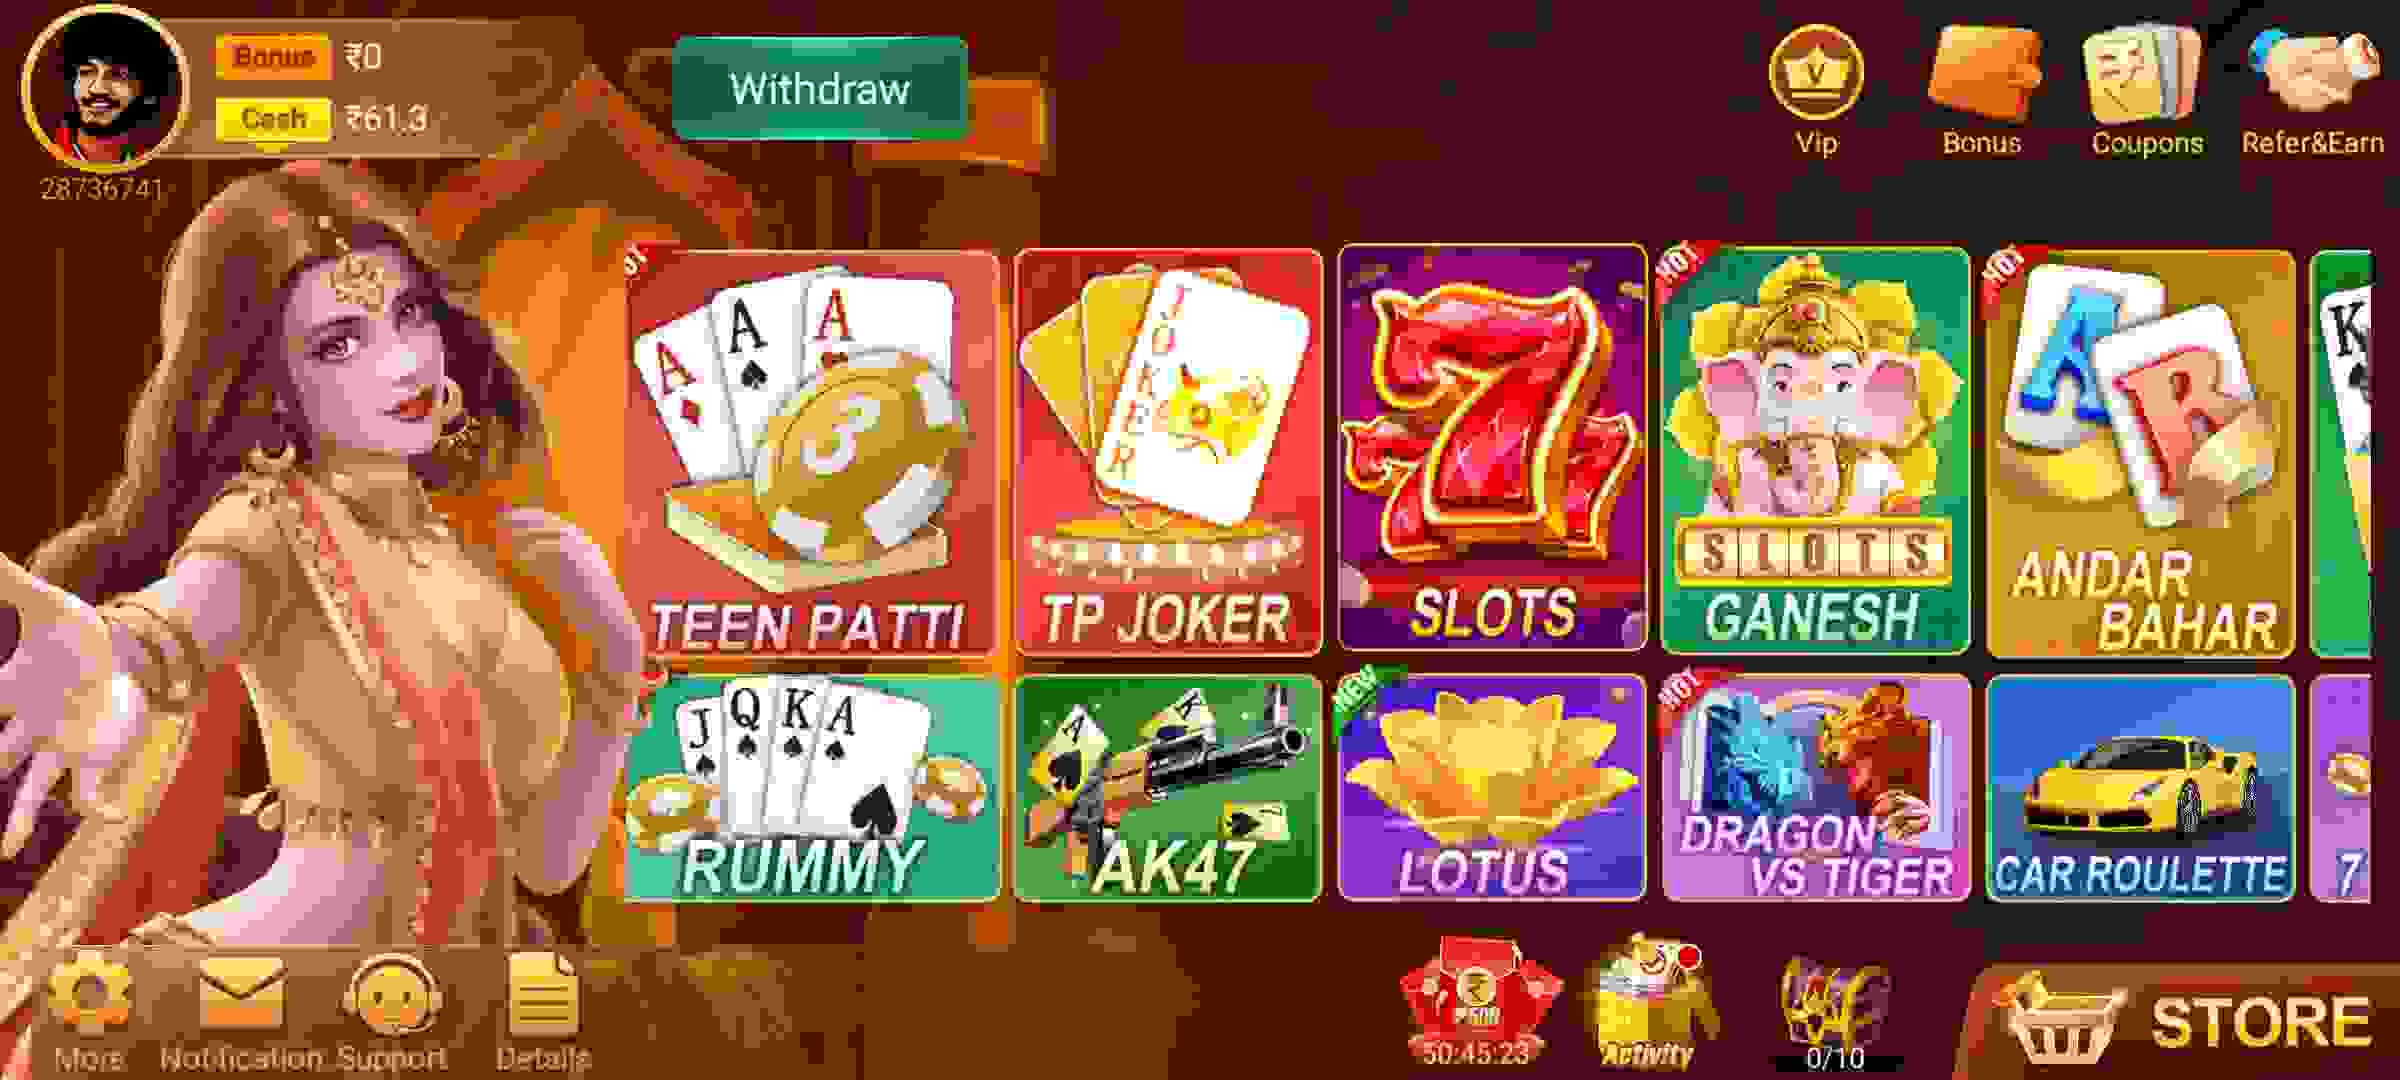 Games Available in Teen Patti Blitz APK